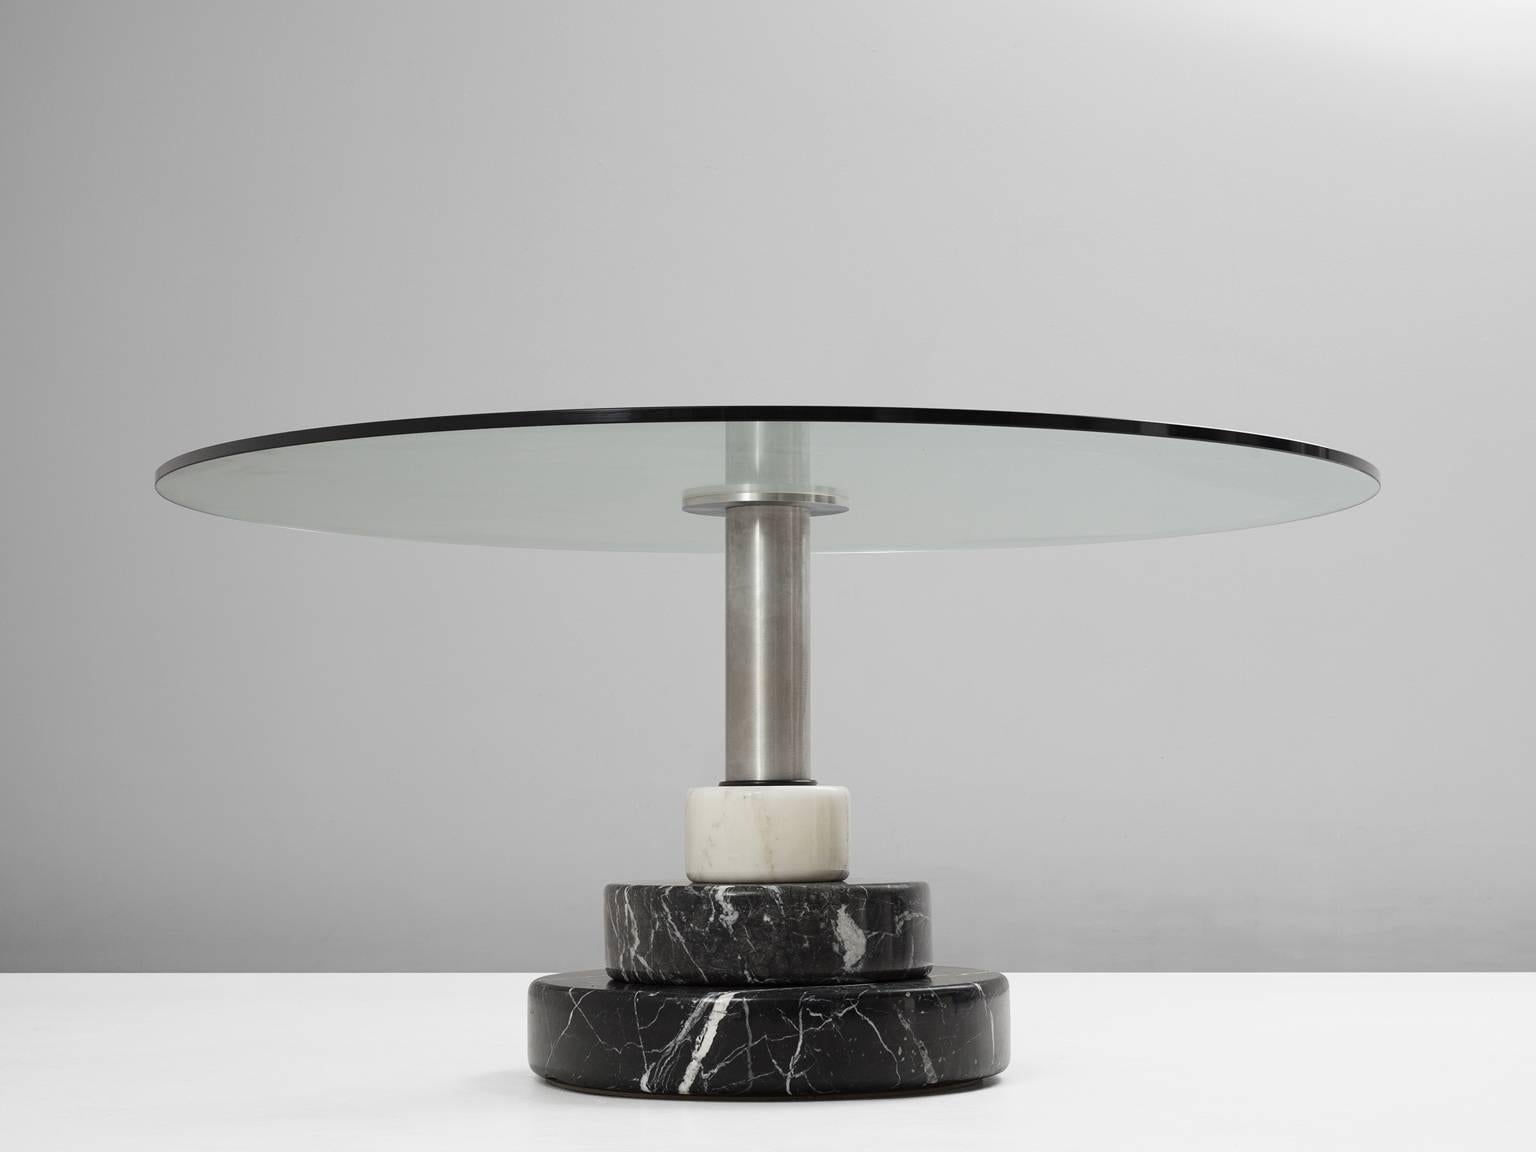 Table model 'Menhir', in marble, stainless steel and glass, by Lodovico Acerbis and Giotto Stoppino for Acerbis International, Italy, 1983.

This well designed table was part of the "Menhir" collection, designed and produced in the early